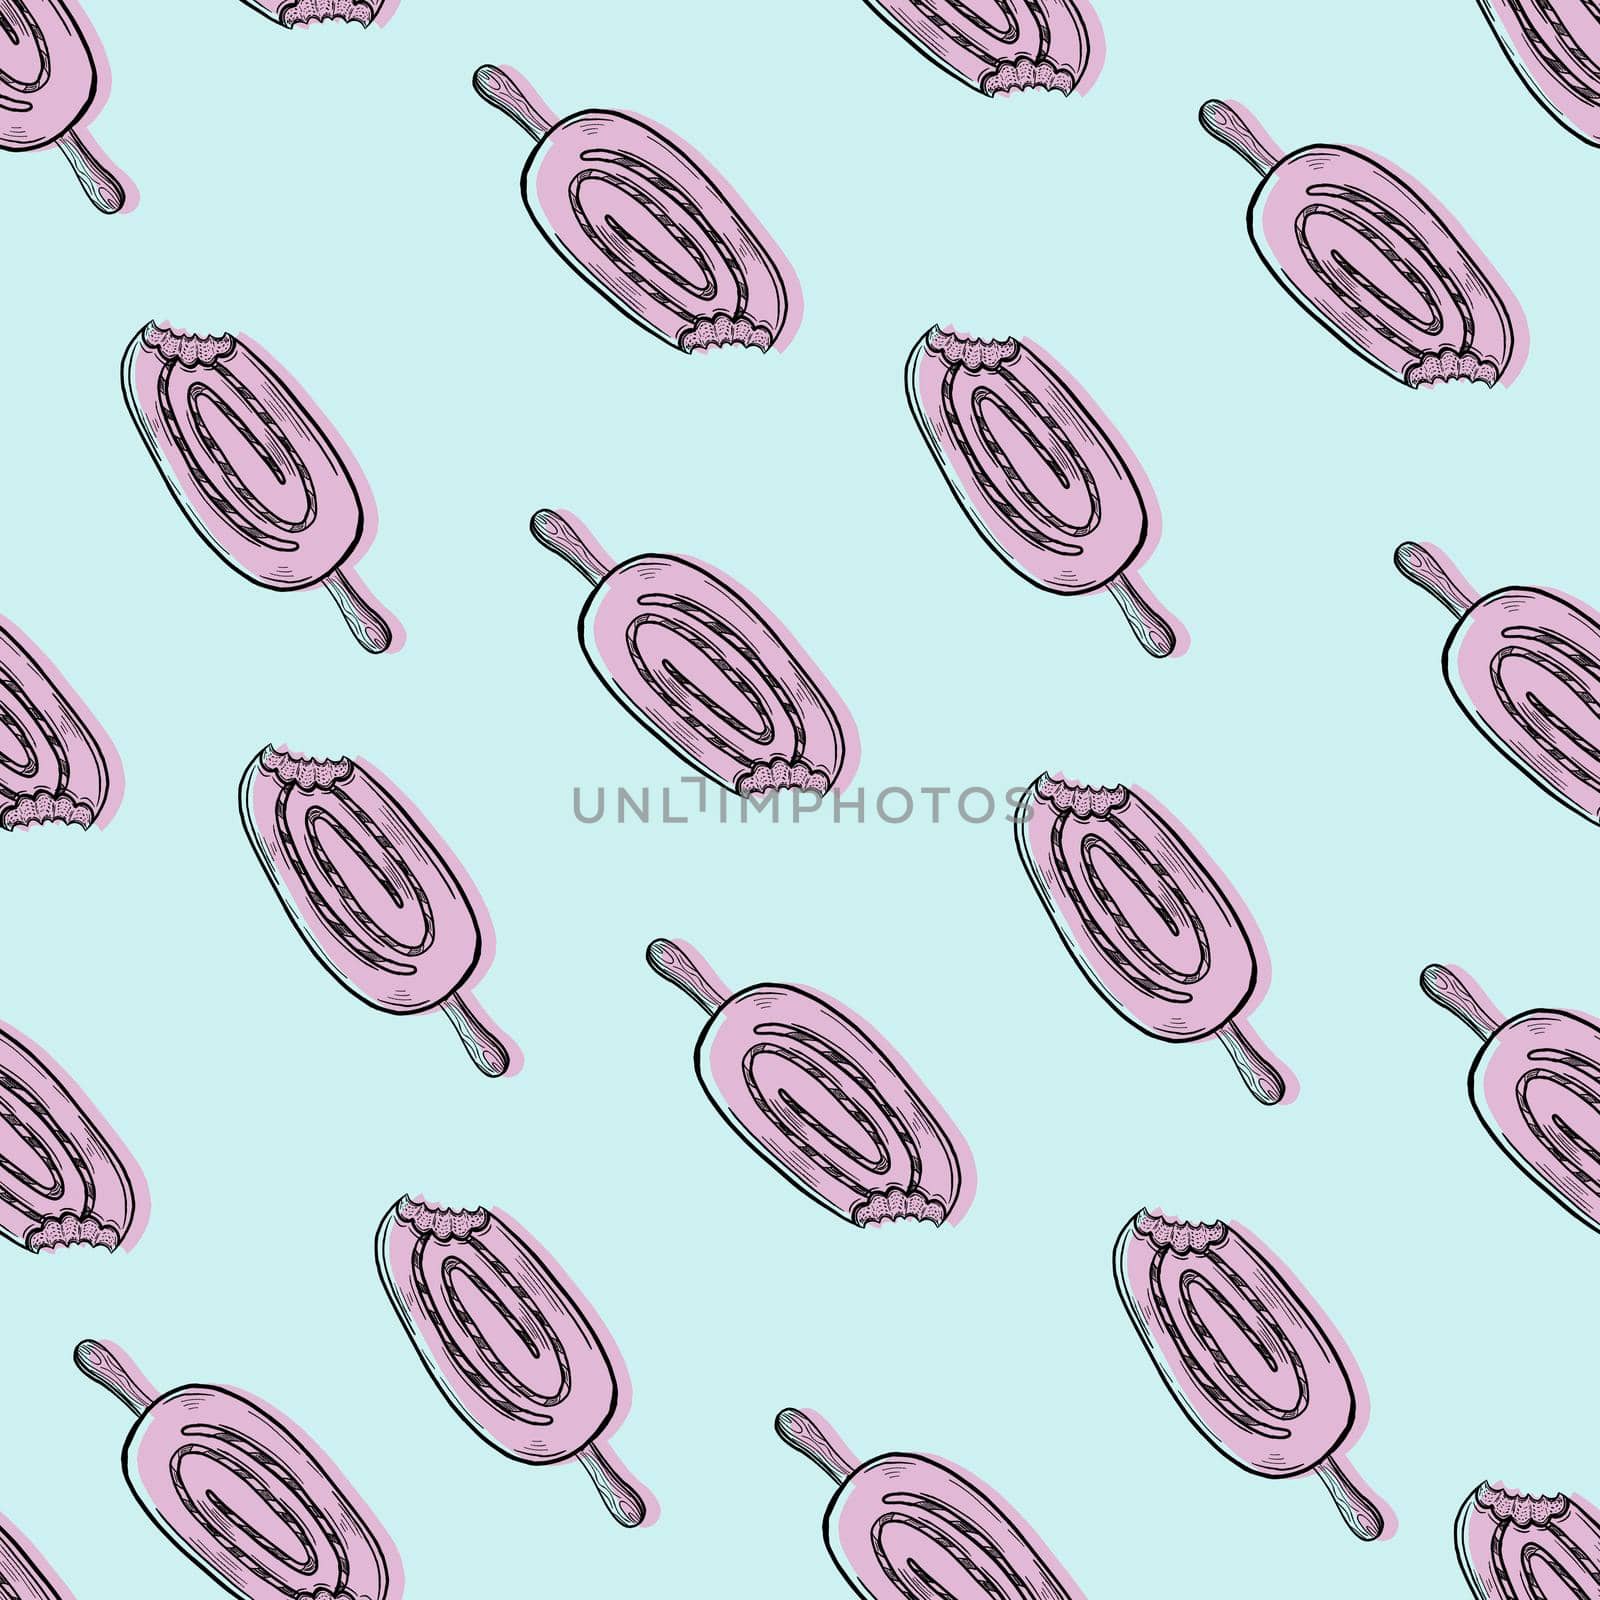 Popsicle seamless pattern illustration, Cute Popsicle on blue background.